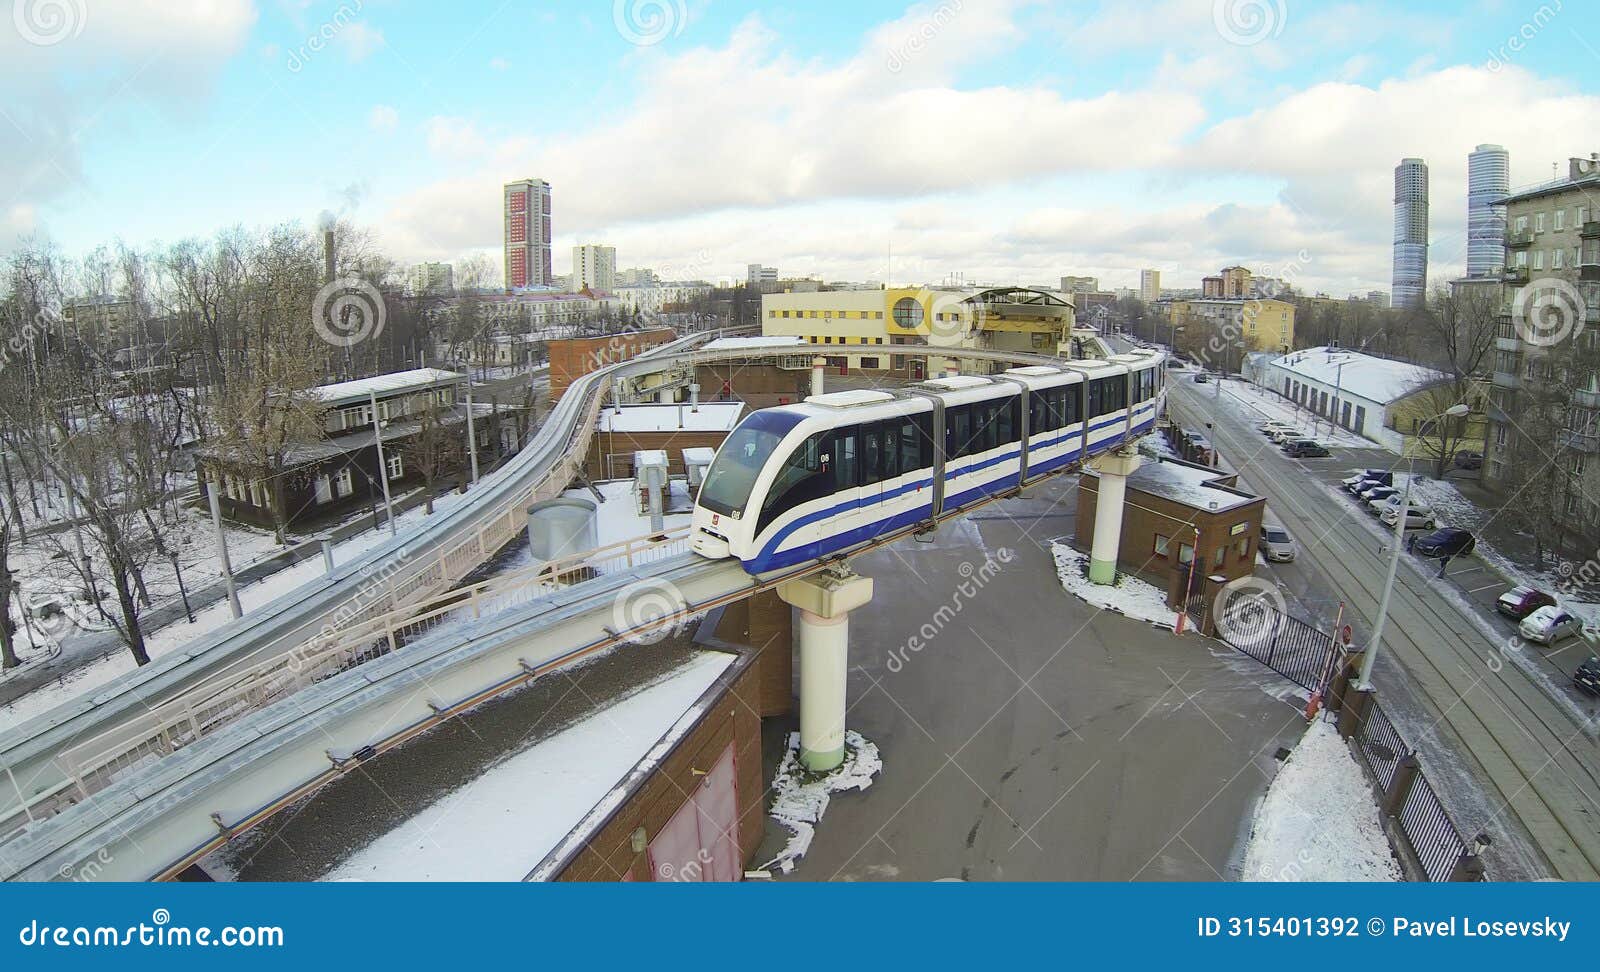 a train at the last station of the moscow monorail